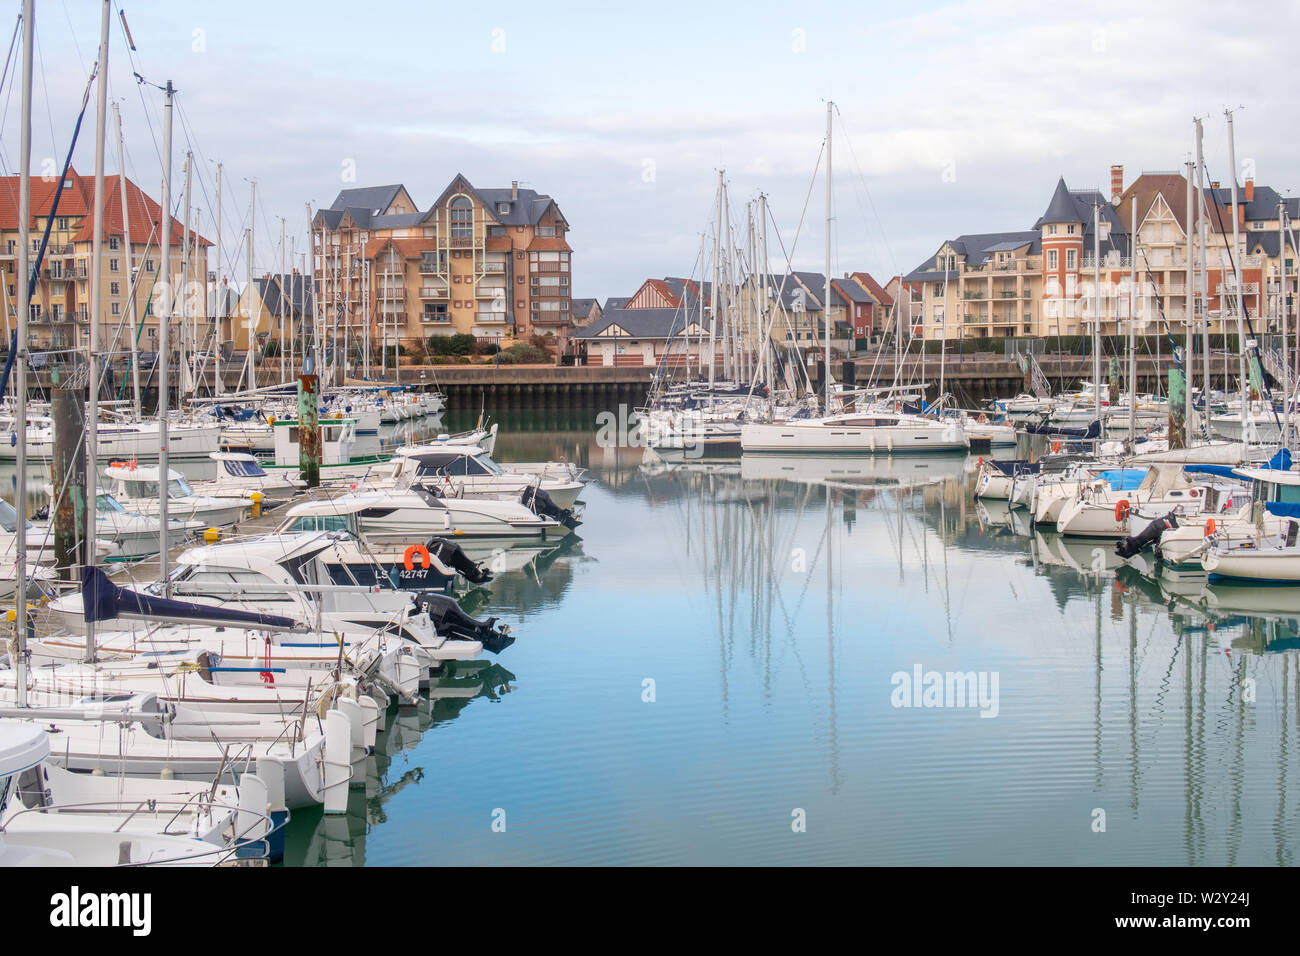 Dives-Sur-Mer, France - January 3, 2019: the harbour, boats, and buildings at dives-sur-mer Stock Photo